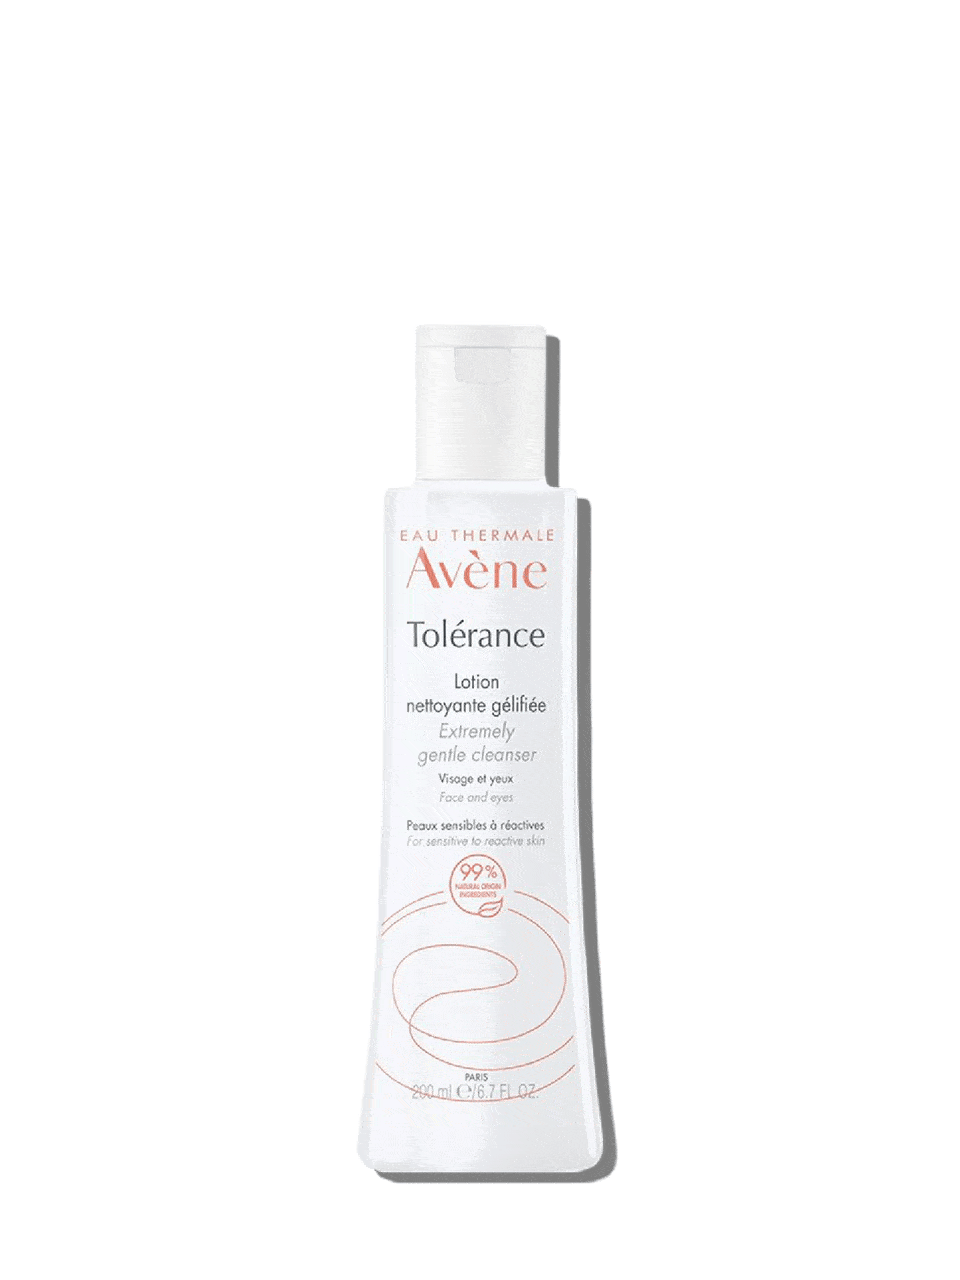 Avène Tolerance Extremely Gentle Cleanser - Joanna Czech